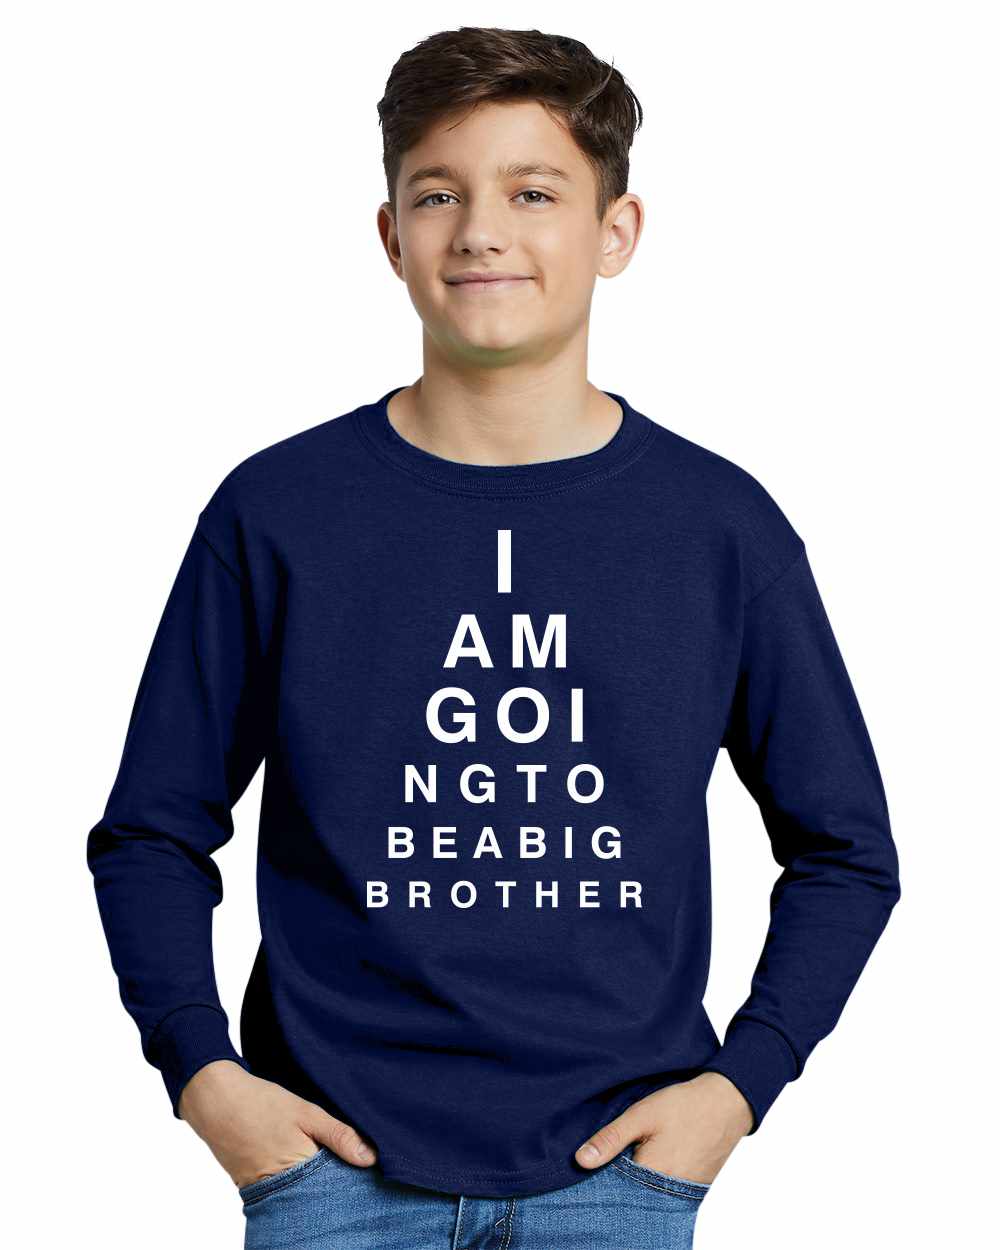 I AM GOING TO BE BIG BROTHER EYE CHART on Youth Long Sleeve Shirt (#1007-203)